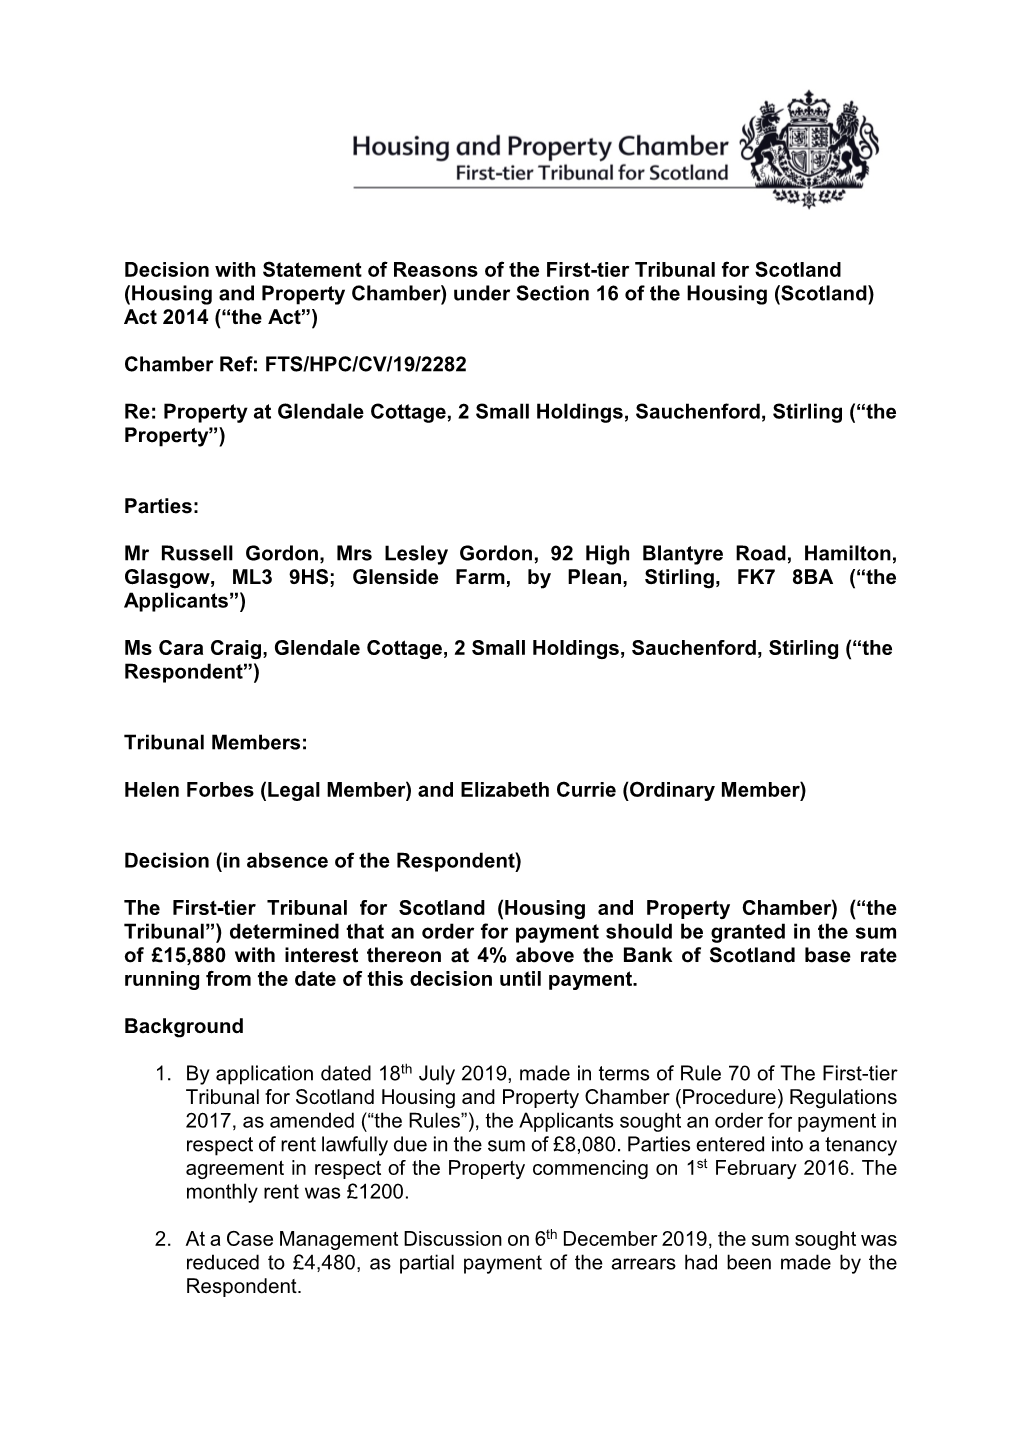 Decision with Statement of Reasons of the First-Tier Tribunal for Scotland